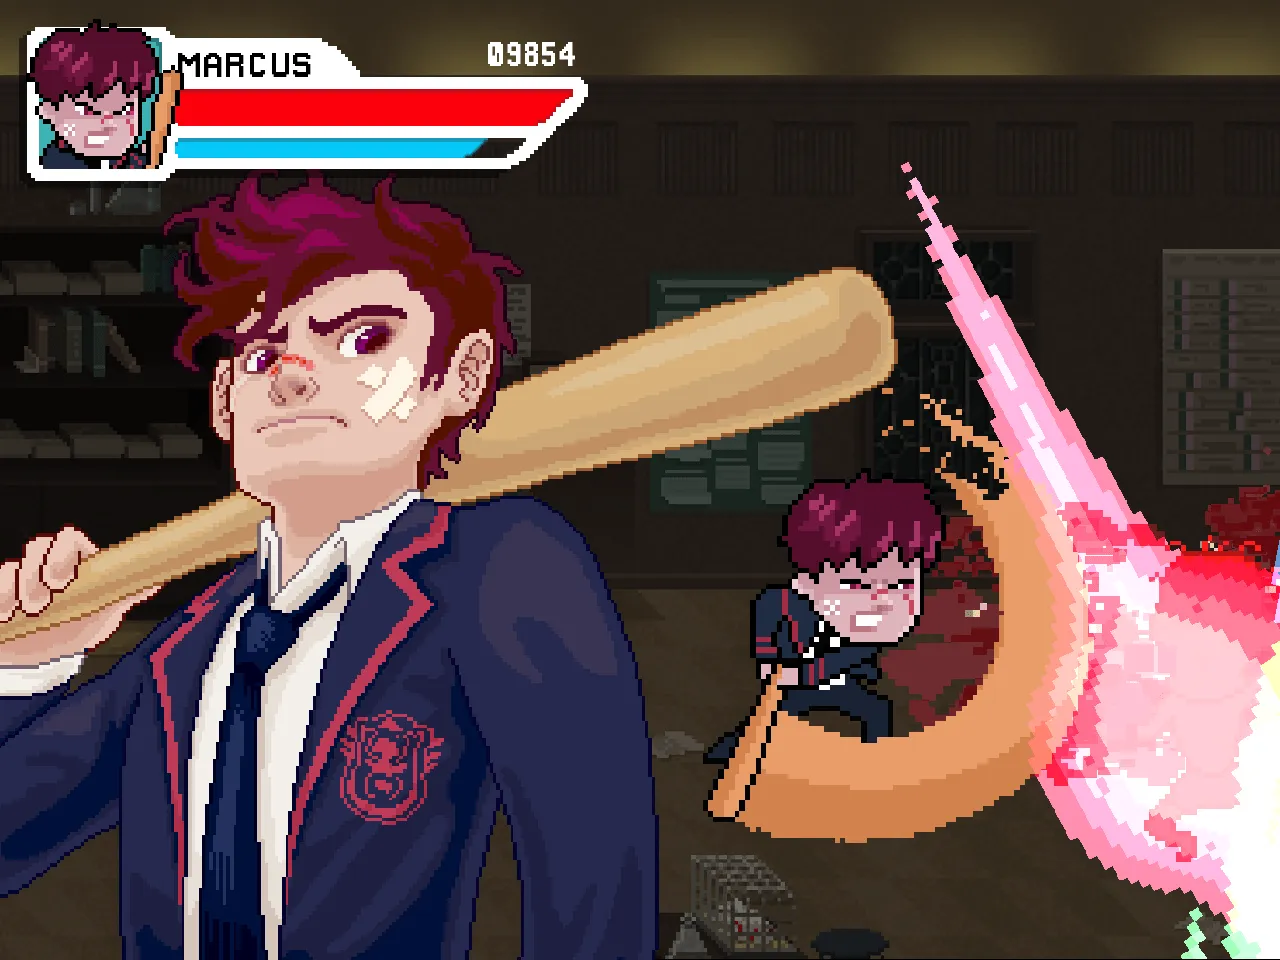 Poject - <p>A browser-based game made in pixel art like the Beat'em up classic arcade games. Based on FOX's Deadly Class and nominee for Big Brands at the BIG Festival 2019.</p>